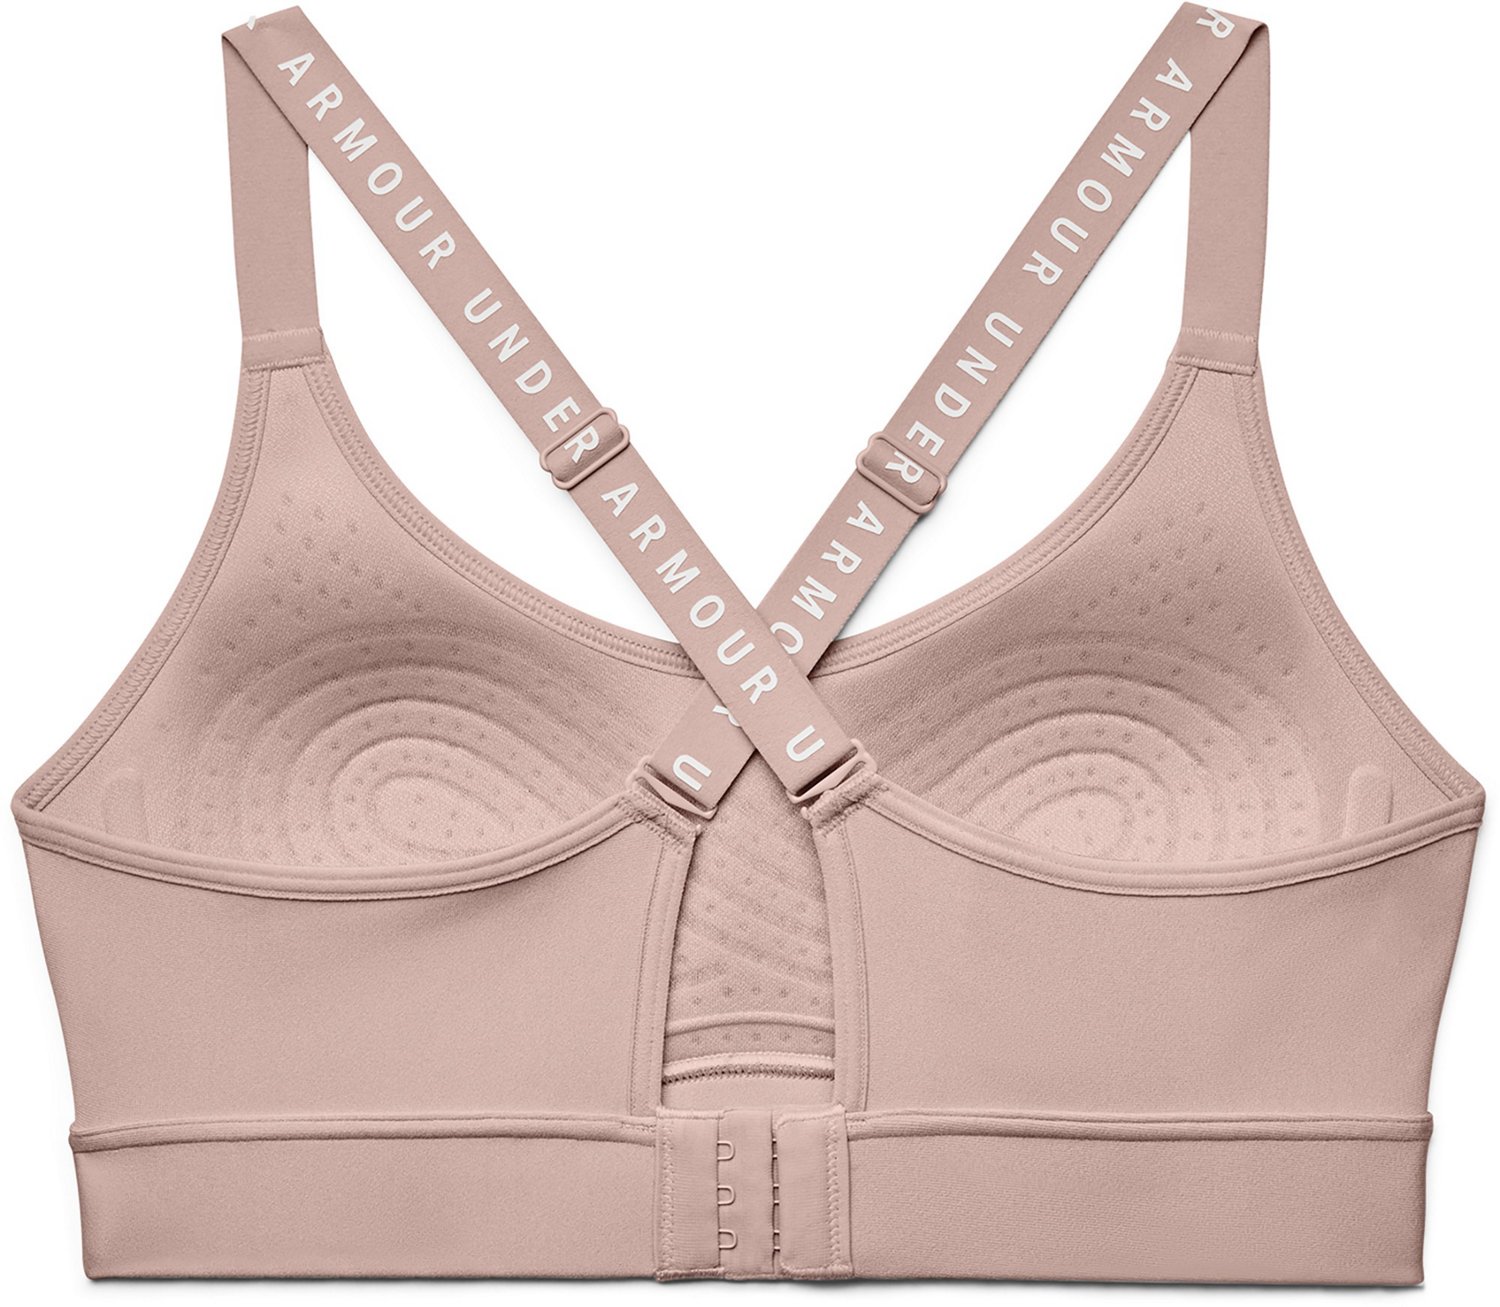 Under Armour Infinity Mid Women's Bra - SS21 - Small - Pink